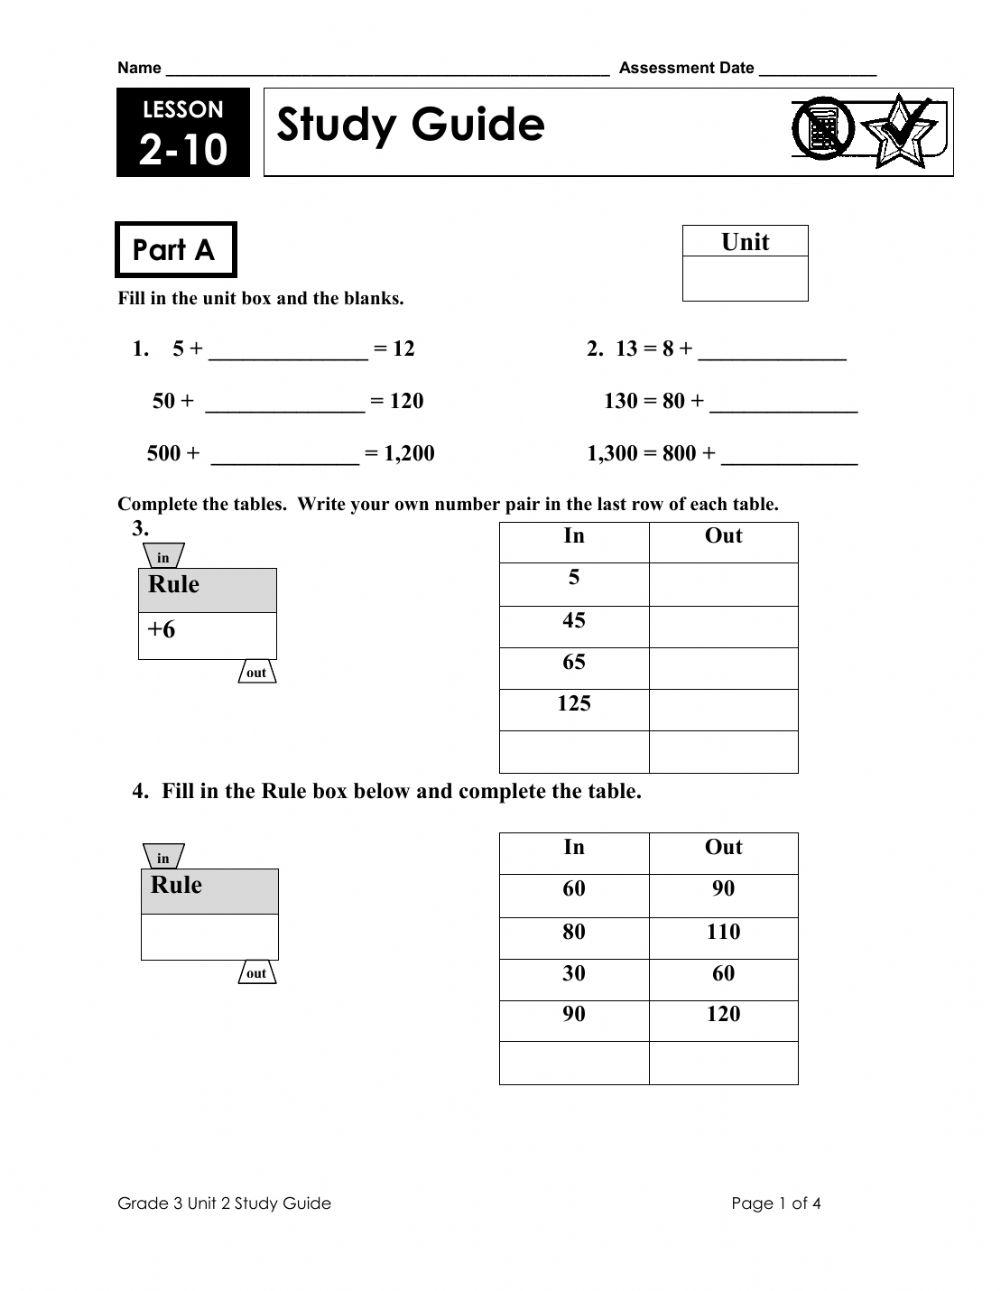 Everyday Math Review Guide Unit 2